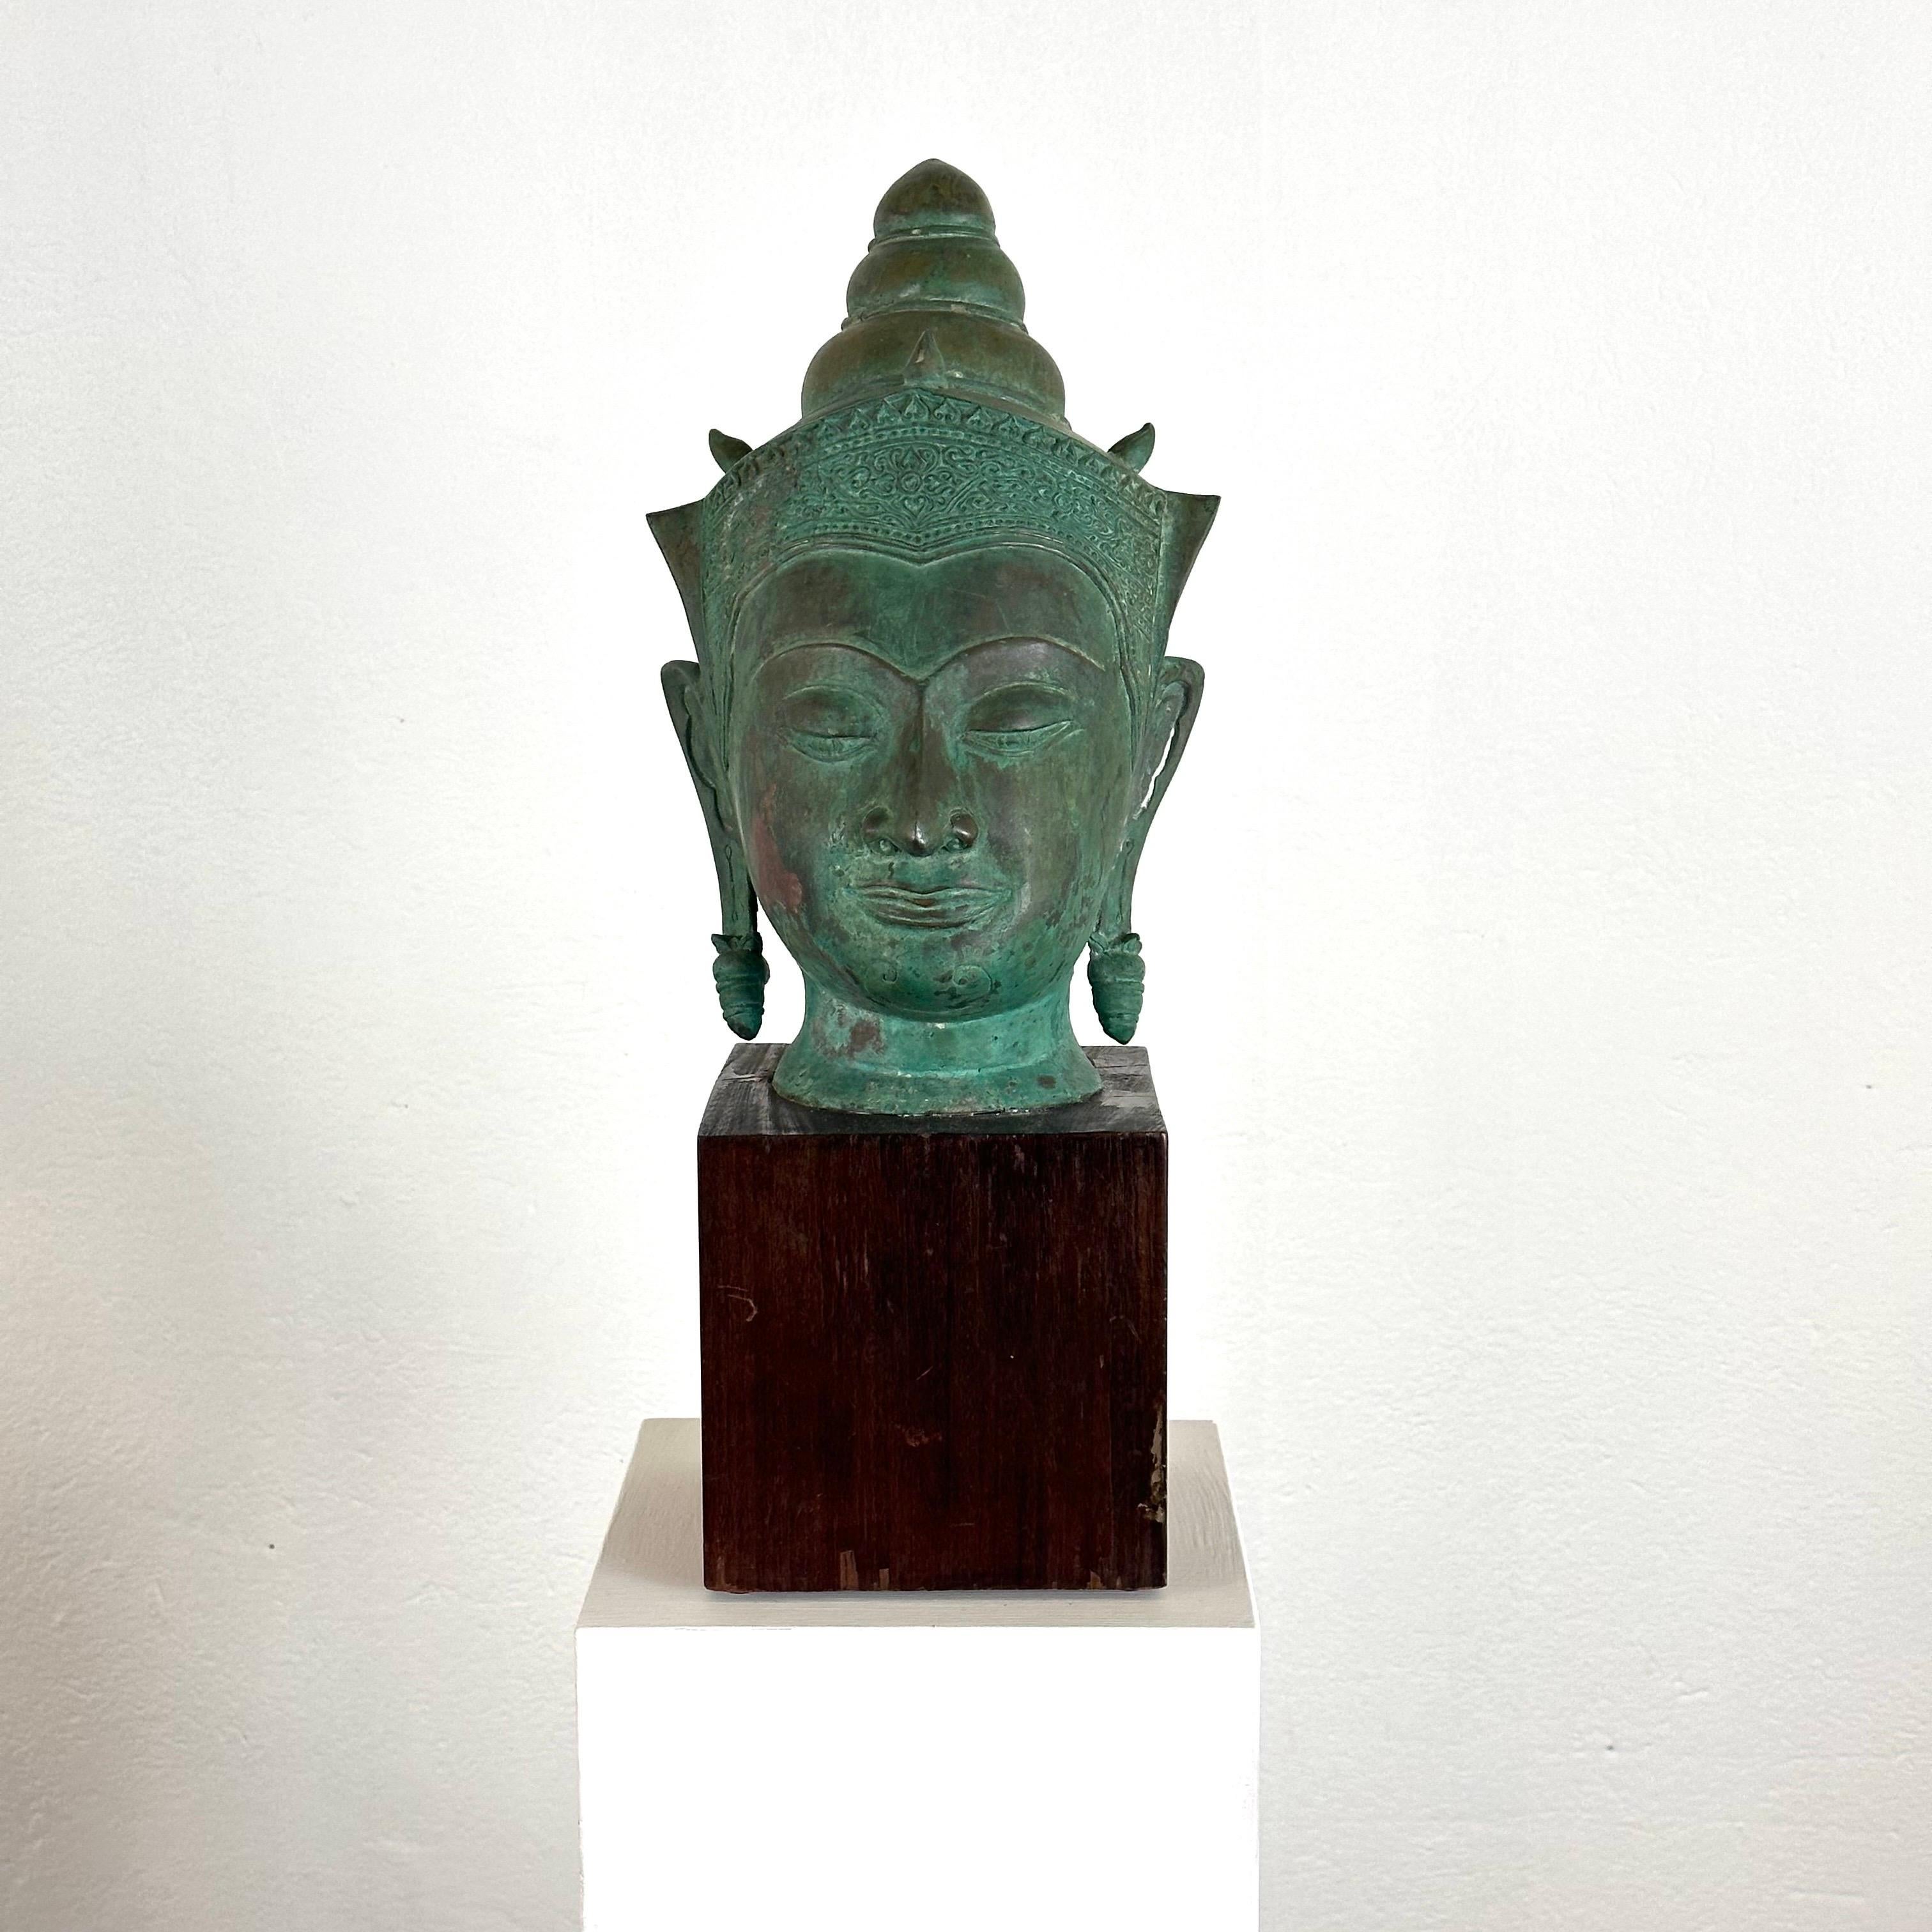 Immerse yourself in the serene beauty of Thai craftsmanship with this magnificent 19th-century bronze Buddha head, elegantly presented on a wooden base. Radiating an aura of timeless tranquility, this piece captivates with its exquisite patina and